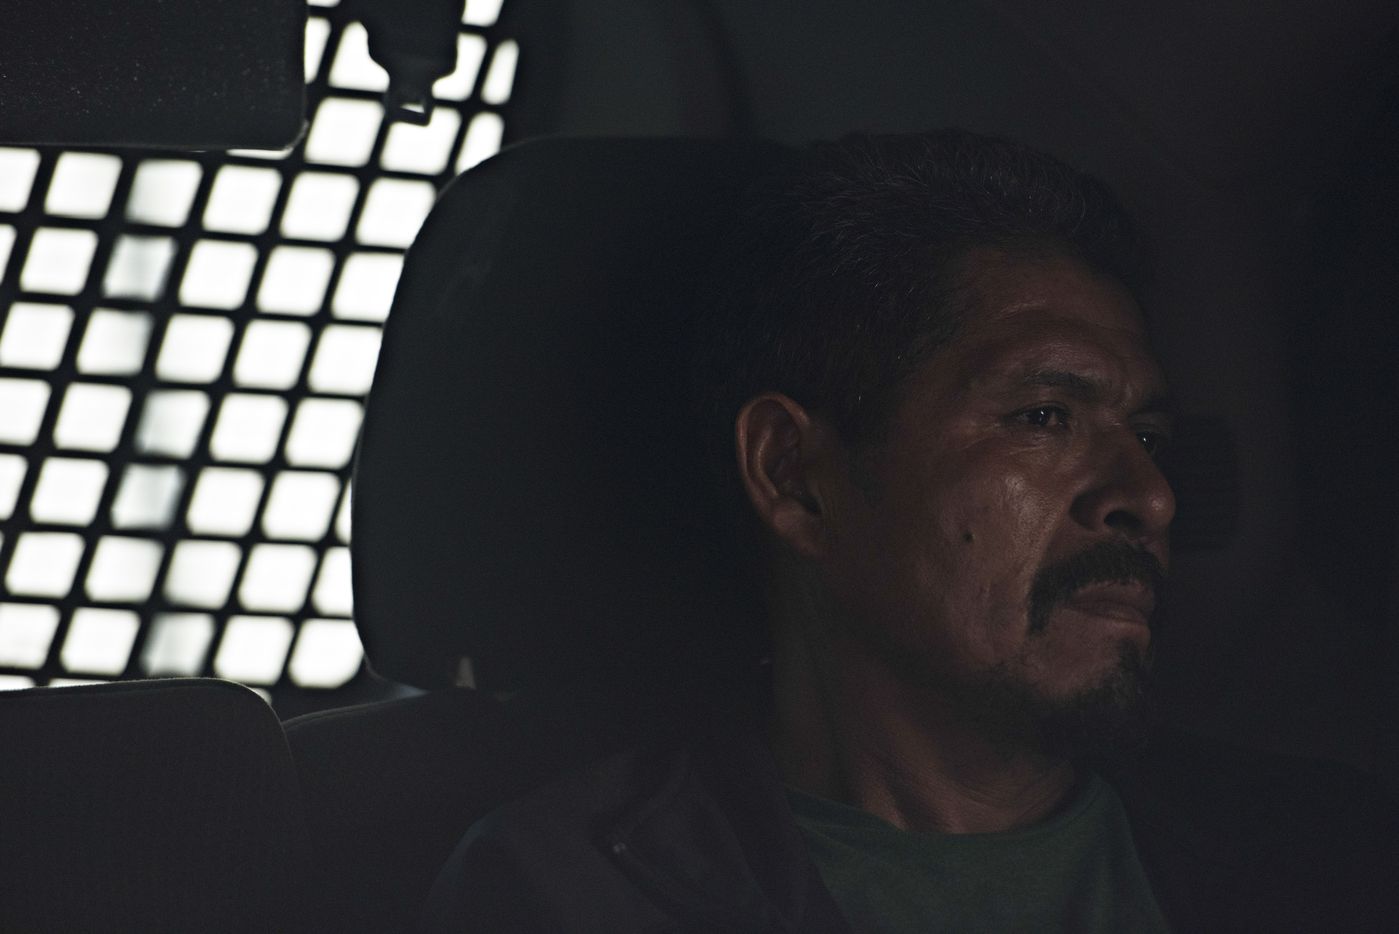 Anselmo Morán Lucero, an undocumented immigrant who has been in the U.S. for 30 years, in an...